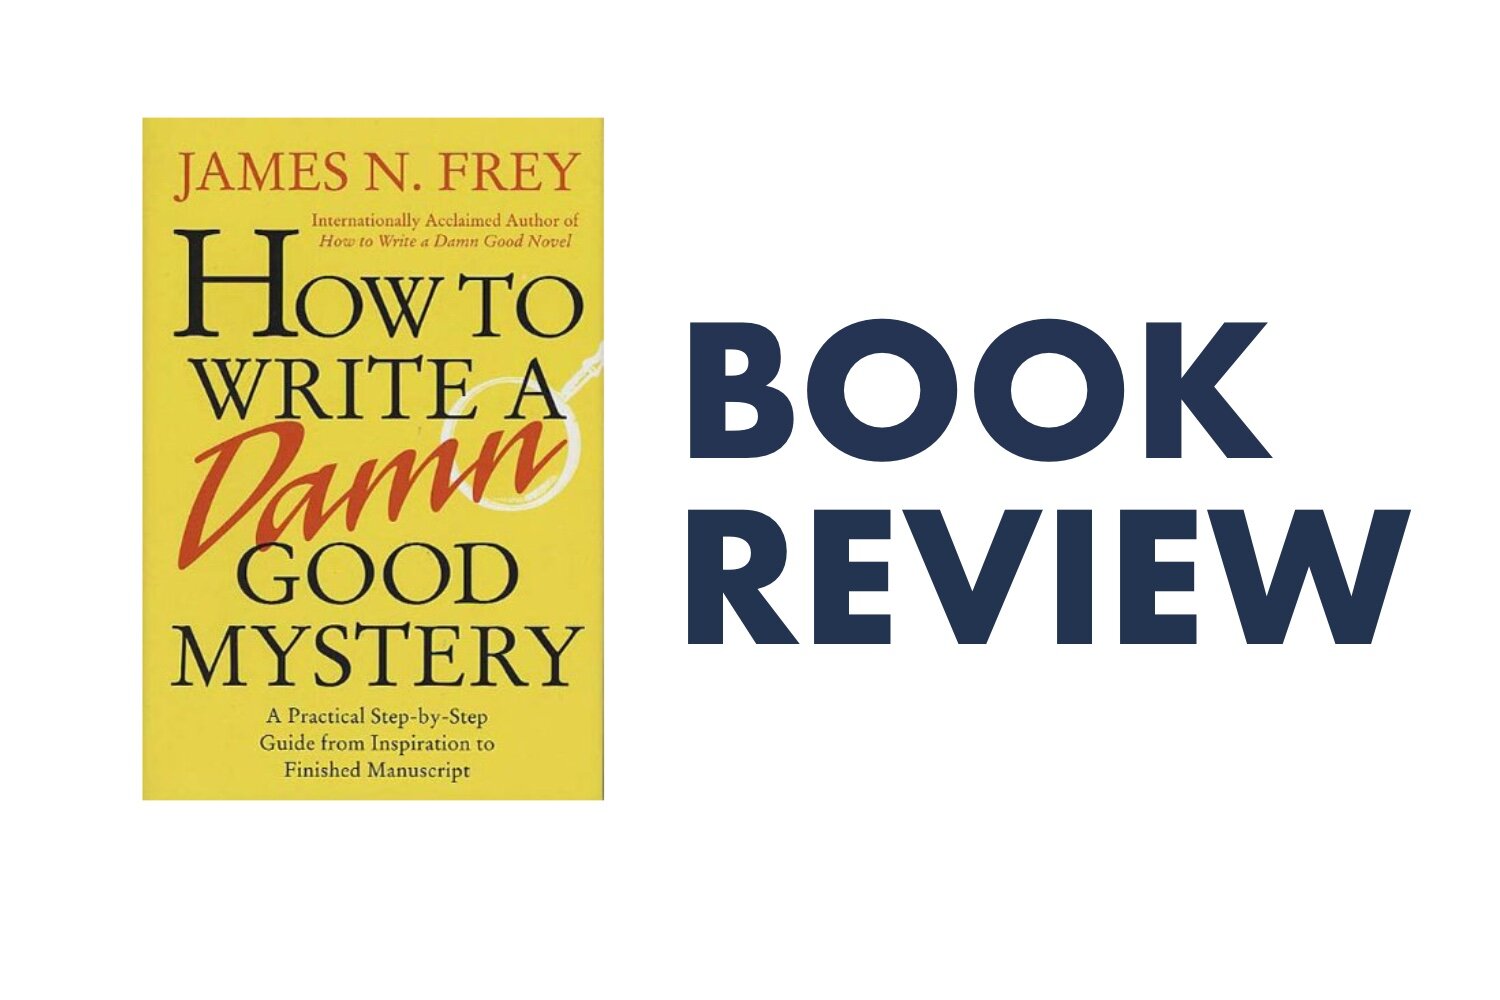 How to Write a Damn Good Mystery, by James Frey: Book Review — The